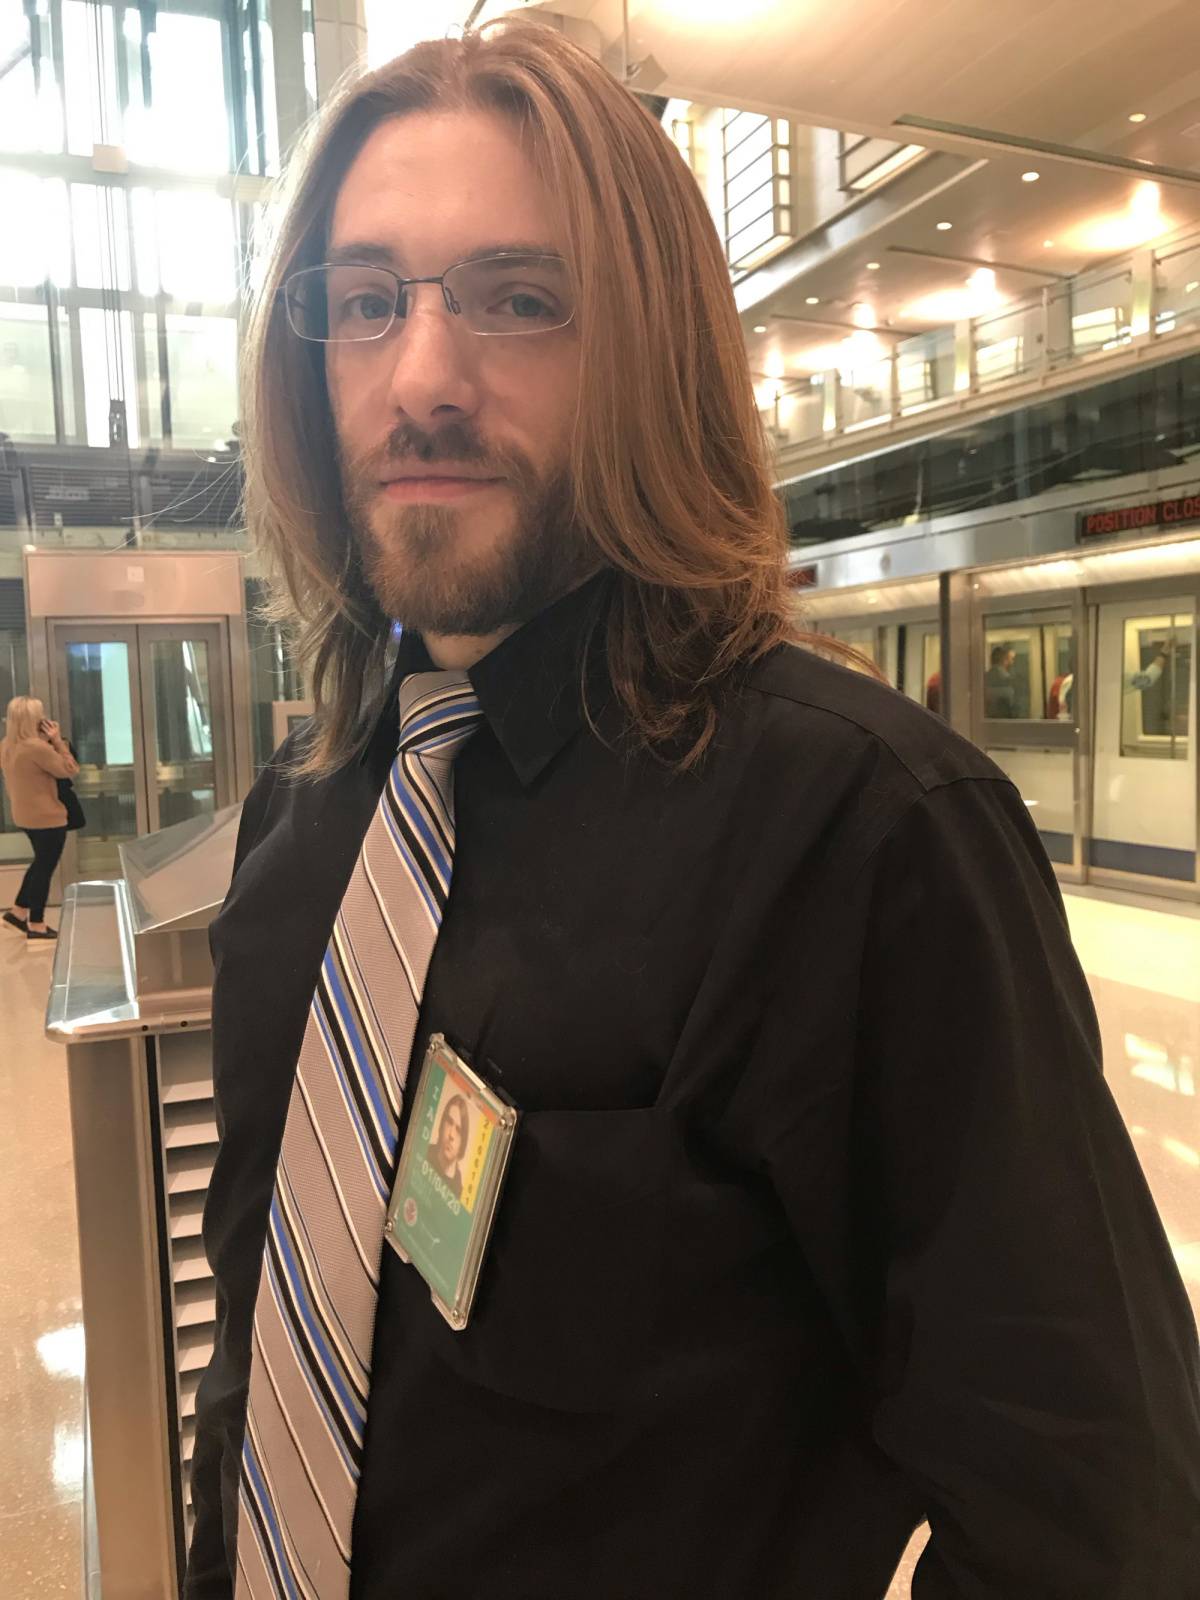 Visited son Kyle in November 2019 in Virginia. He’s growing his hair out for cancer awareness and will donate it eventually. Traveling was so much easier back then :: sigh ::